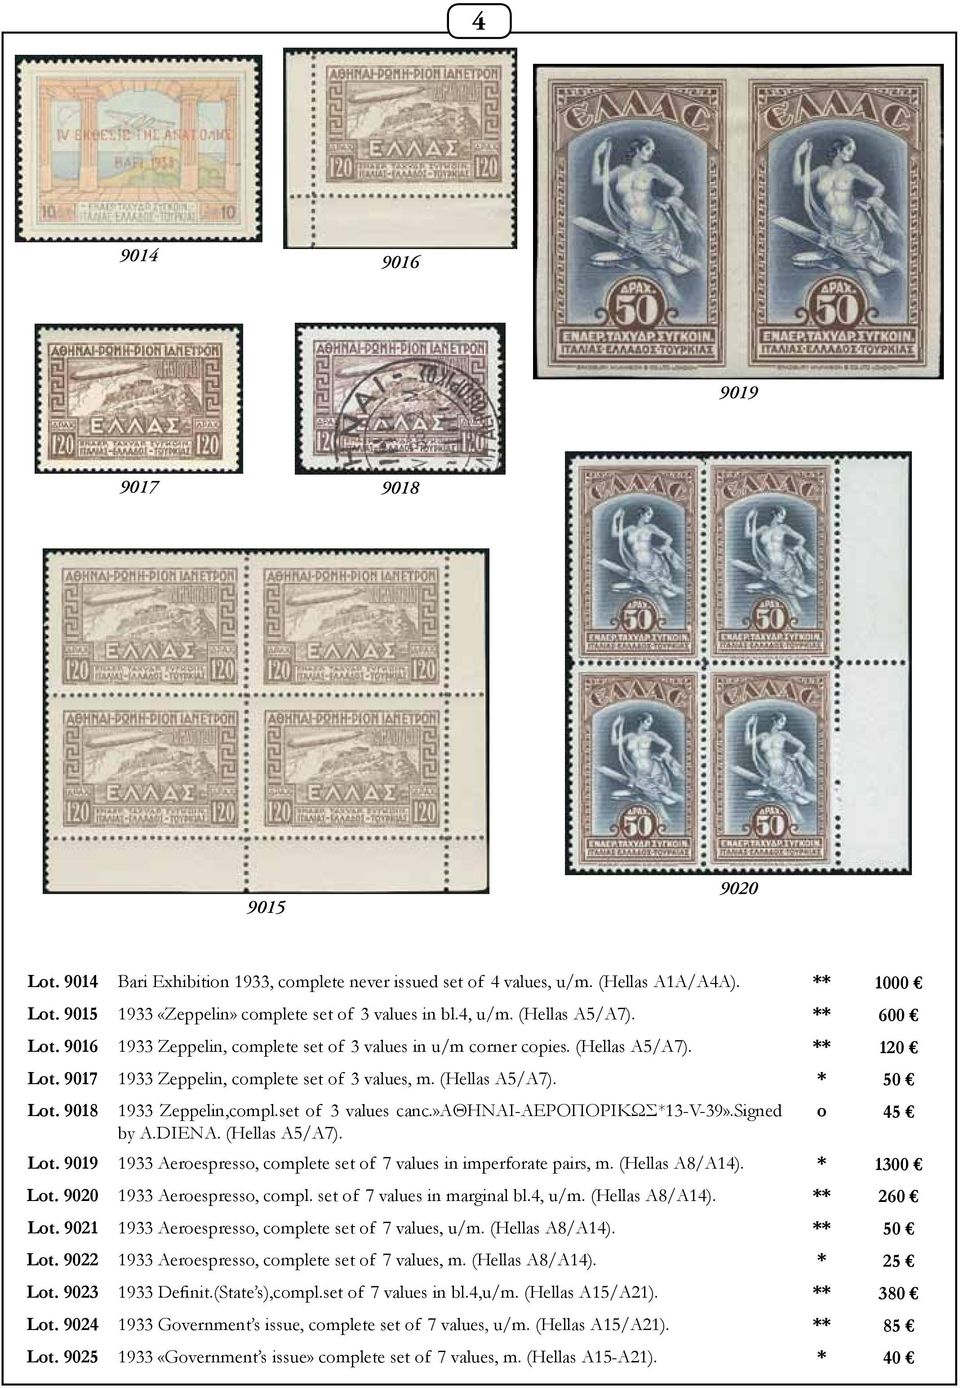 9018 1933 Zeppelin,compl.set of 3 values canc.»αθηναι-αεροπορικωσ*13-v-39».signed o 45 by A.DIENA. (Hellas A5/A7). Lot. 9019 1933 Aeroespresso, complete set of 7 values in imperforate pairs, m.